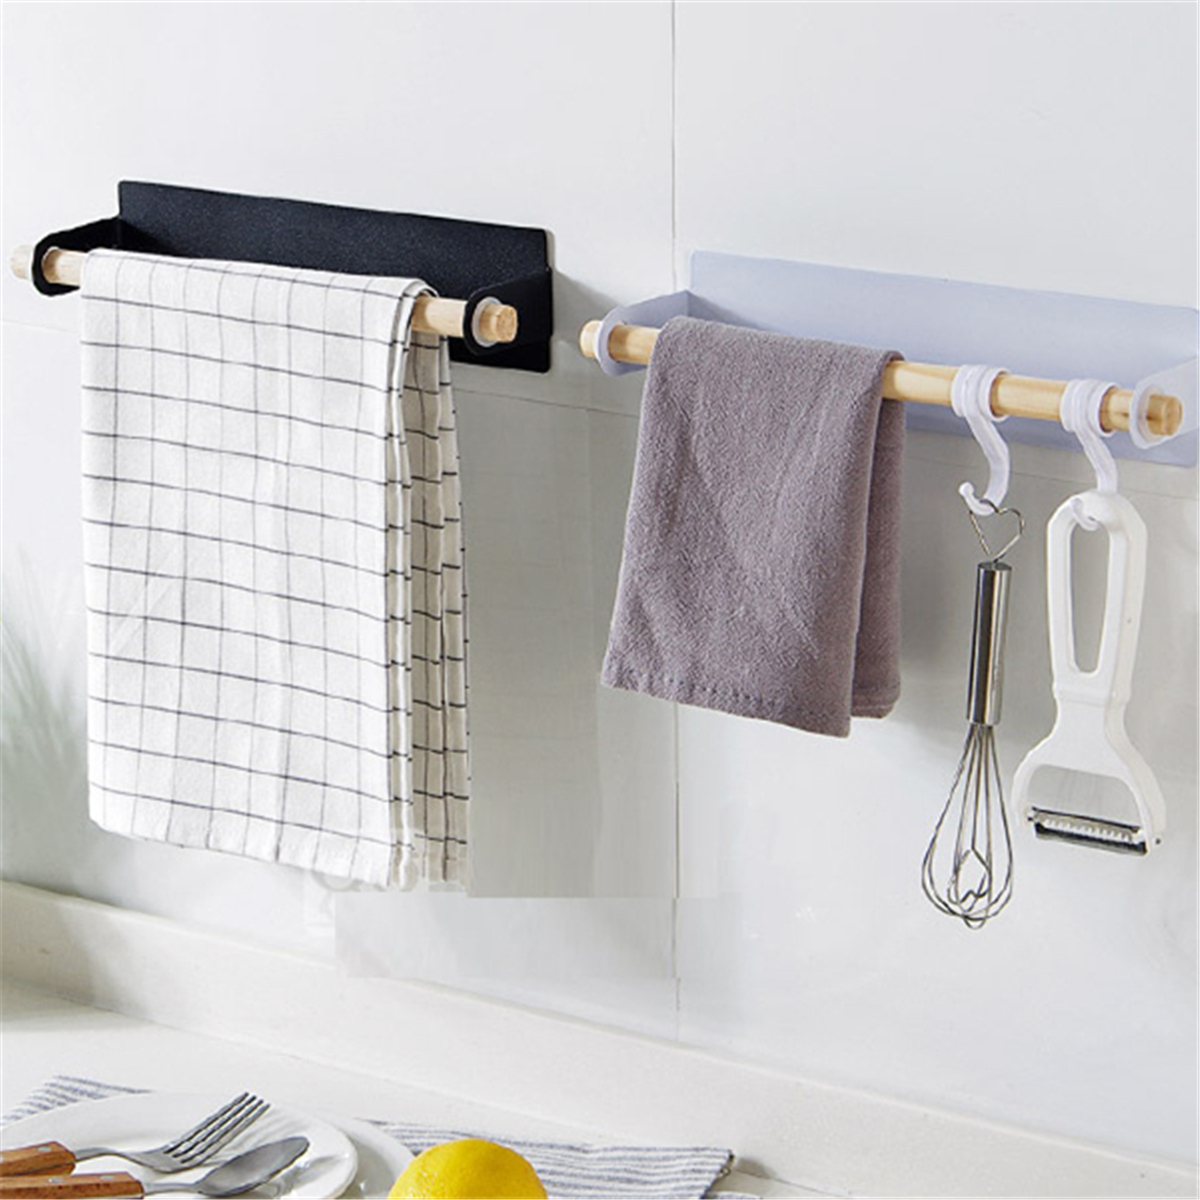 Self-adhesive-Bathroom-Toilet-Paper-Roll-Shelf-Wall-Hanging-Paper-Towel-Holder-for-Kitchen-Bathroom--1725760-5